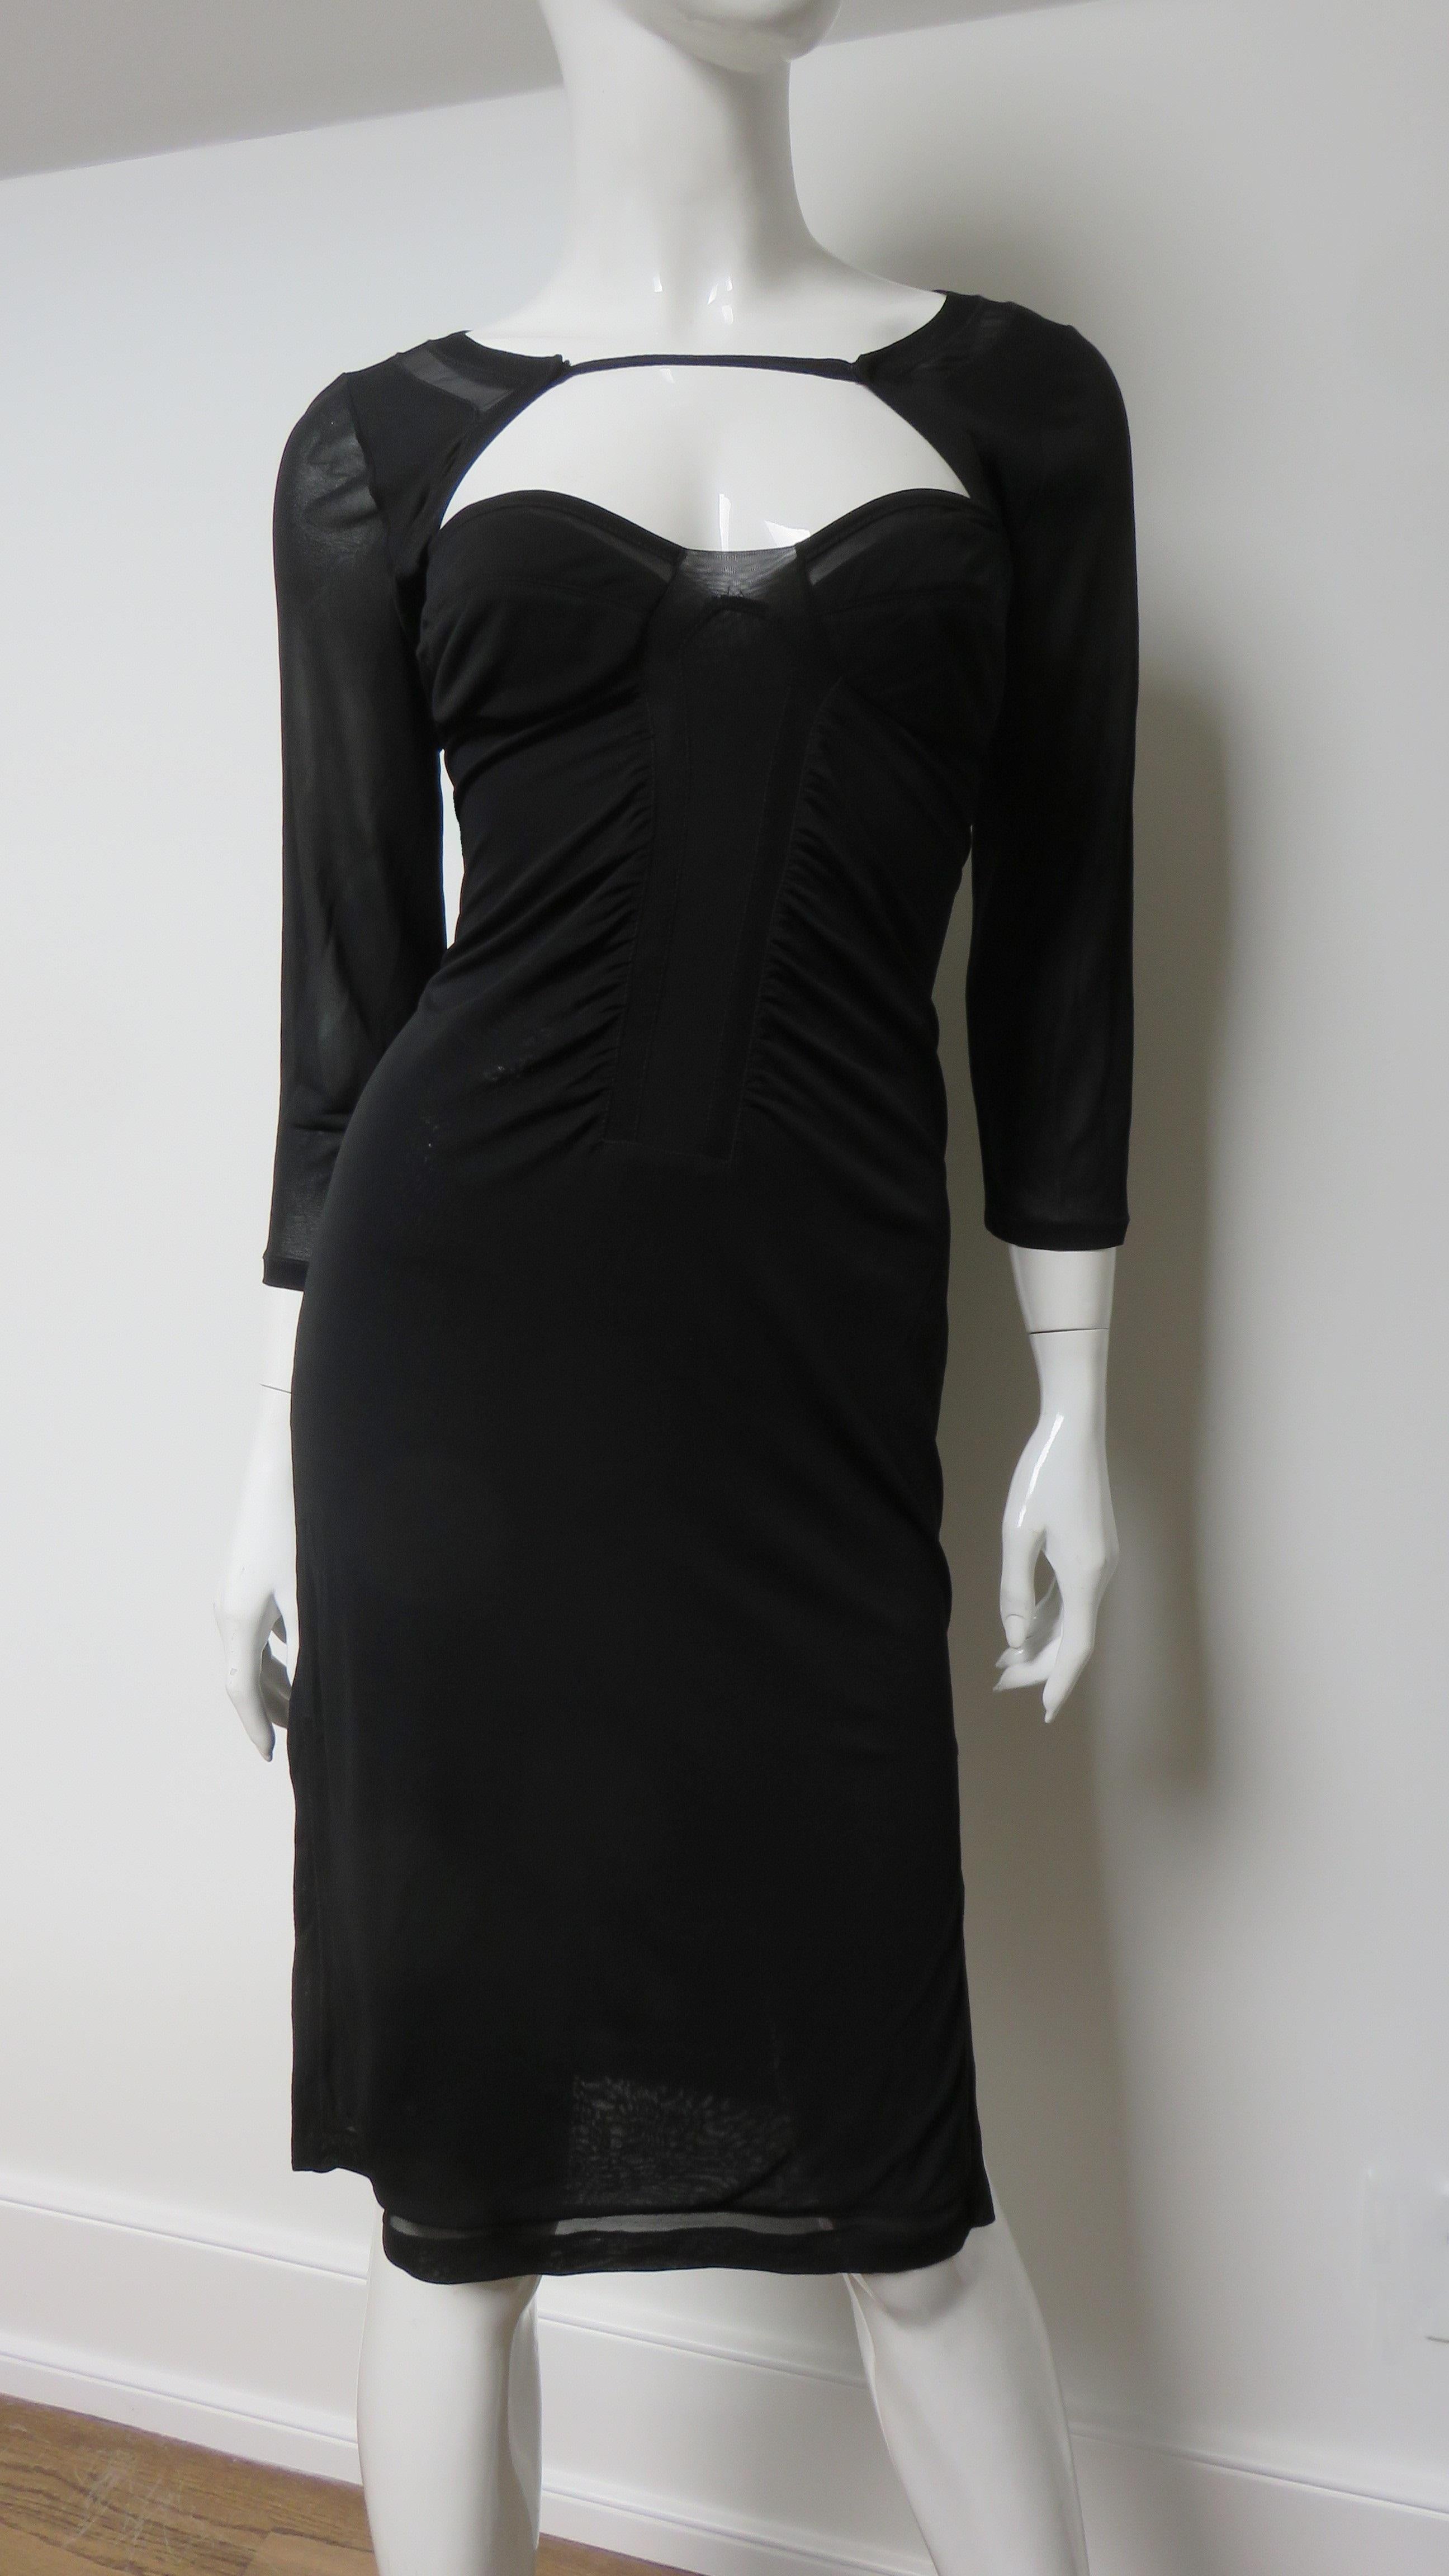 A fabulous black fine stretch silk dress from Tom Ford for Gucci. It has 3/4 length sleeves, slits at the side hem and a fine strap crossing the upper chest and back. There is a ribbon sized sheer panel around the hem and bust. It slips on over the